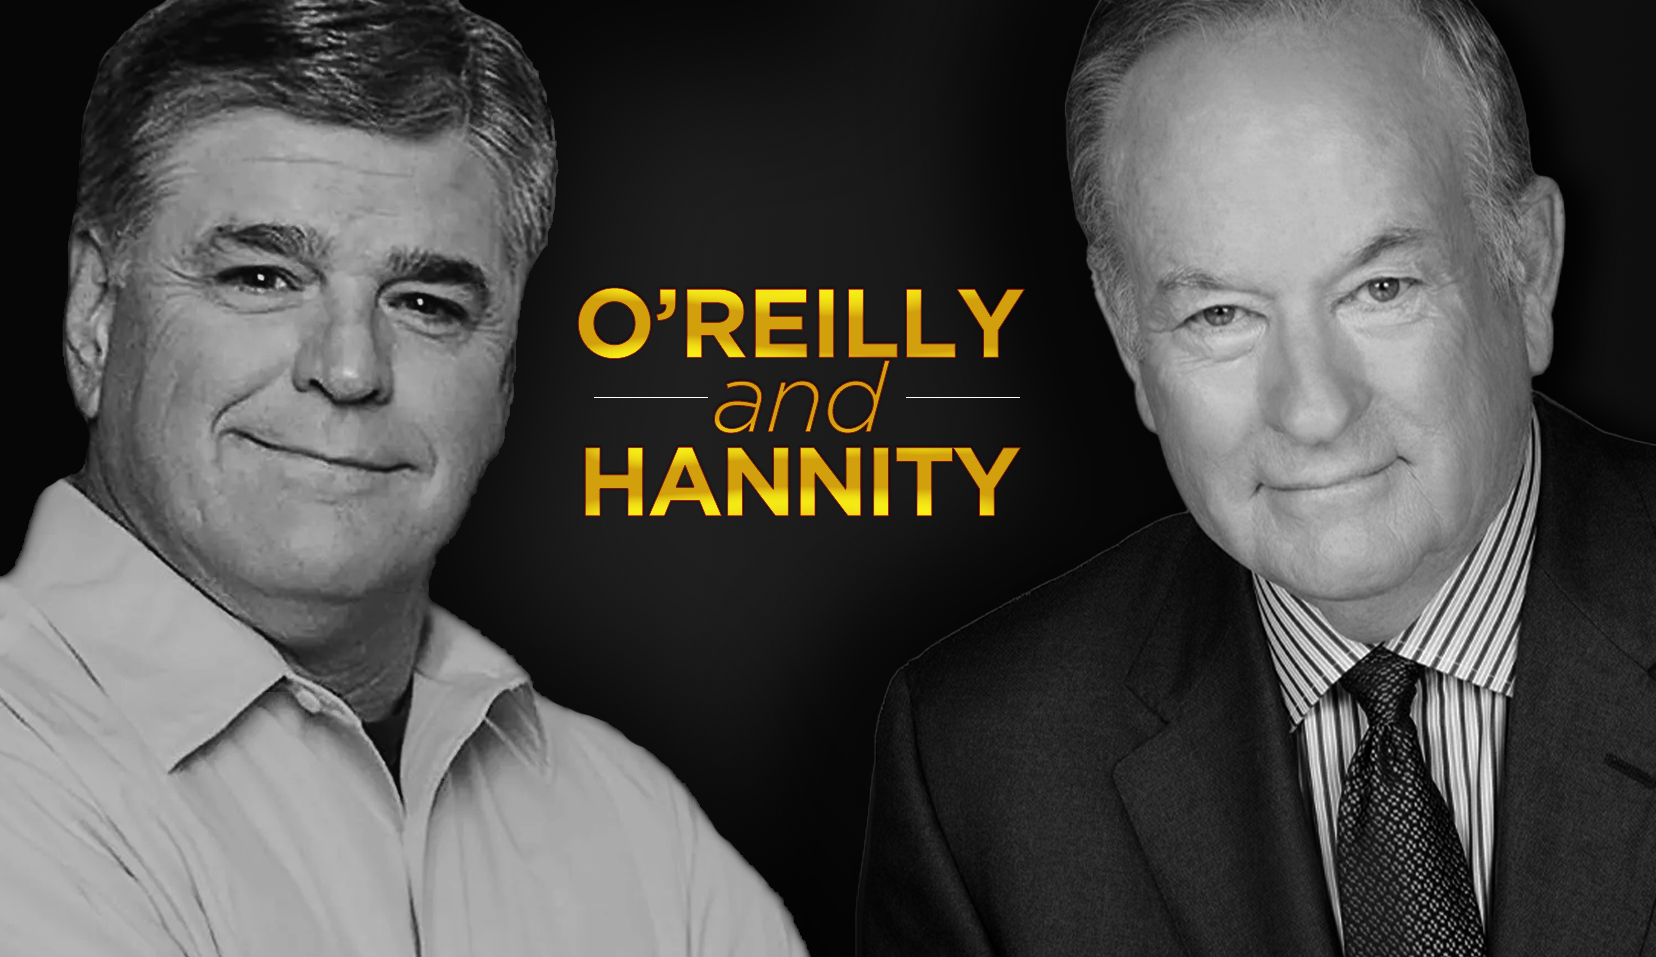 Listen: O'Reilly & Hannity Discuss Biden's Economy and America's Recovery